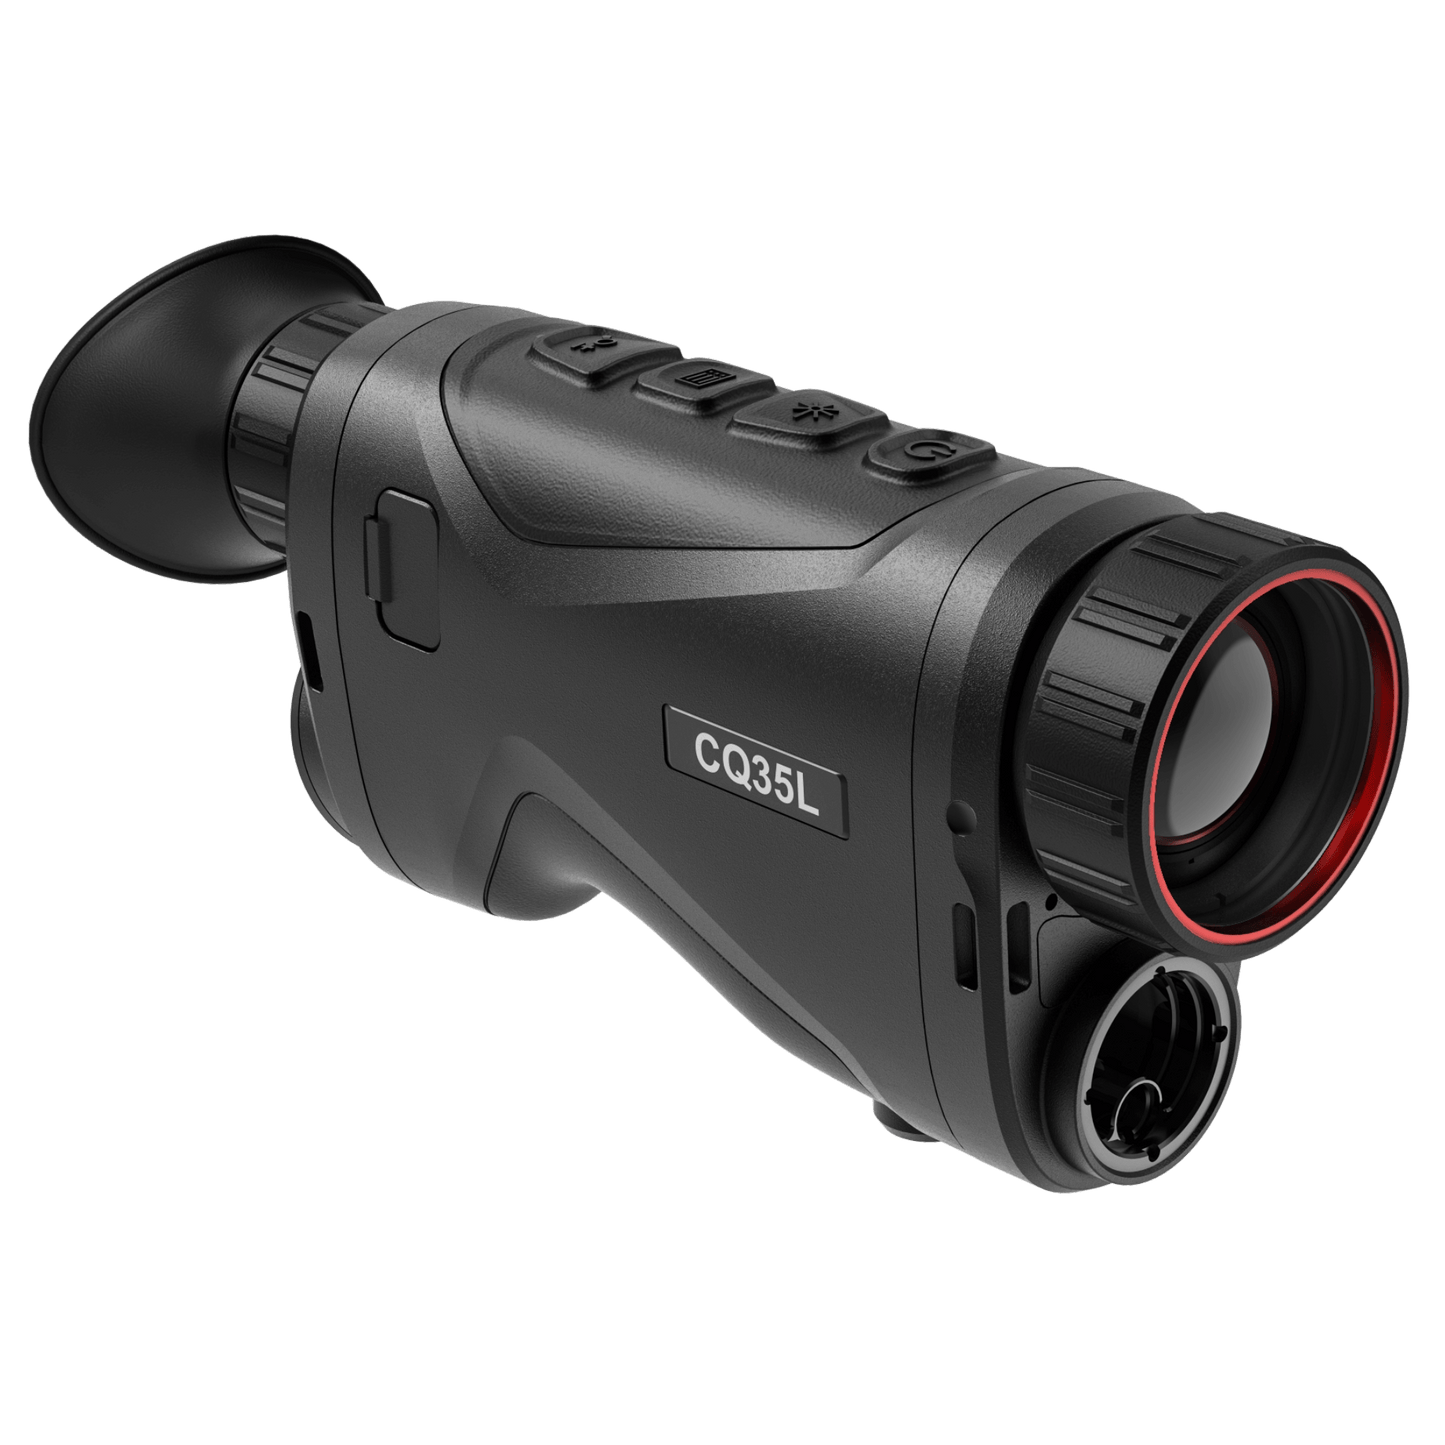 Front view of the CQ35L thermal monocular, showcasing its germanium lens circled in red and the adjacent laser rangefinder.  Distinctive tactile buttons are positioned on top, and the model "CQ35L" is clearly labeled on the side. The robust black casing features contoured grips for user comfort.